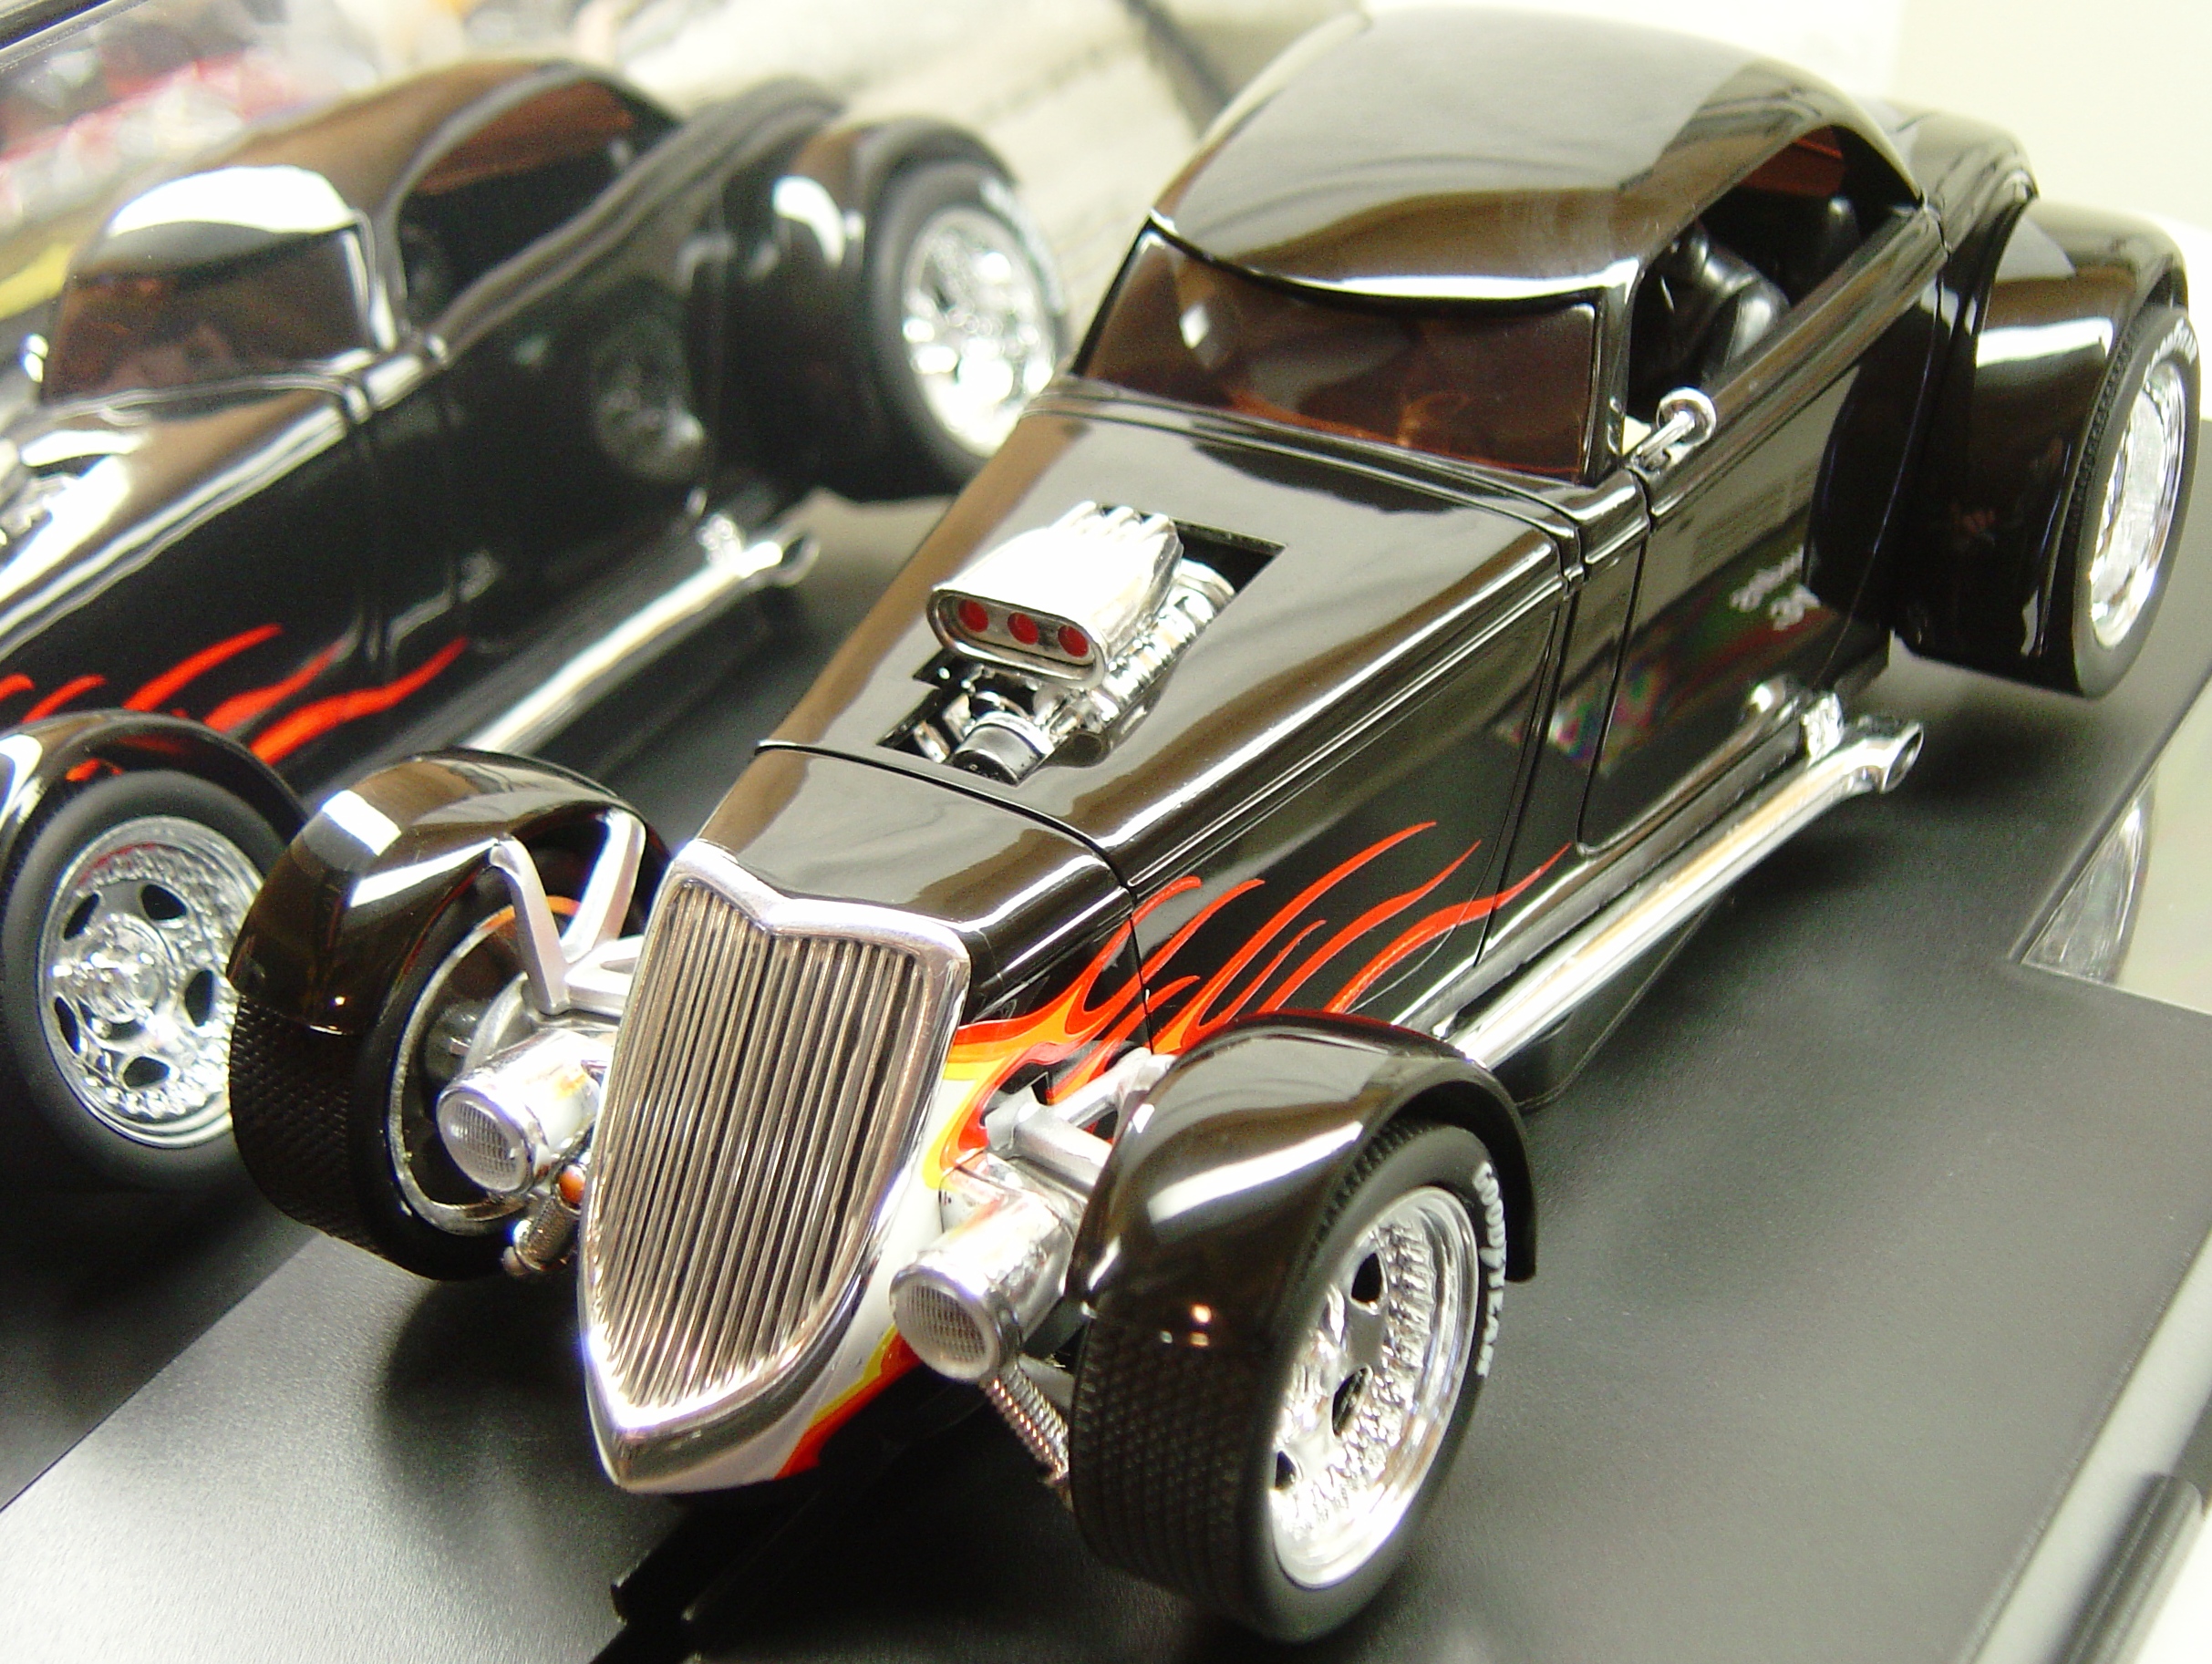 20221 Carrera Exclusiv Analog '34 Hot Rod Supercharged 1:24 Slot Car -  Great Traditions